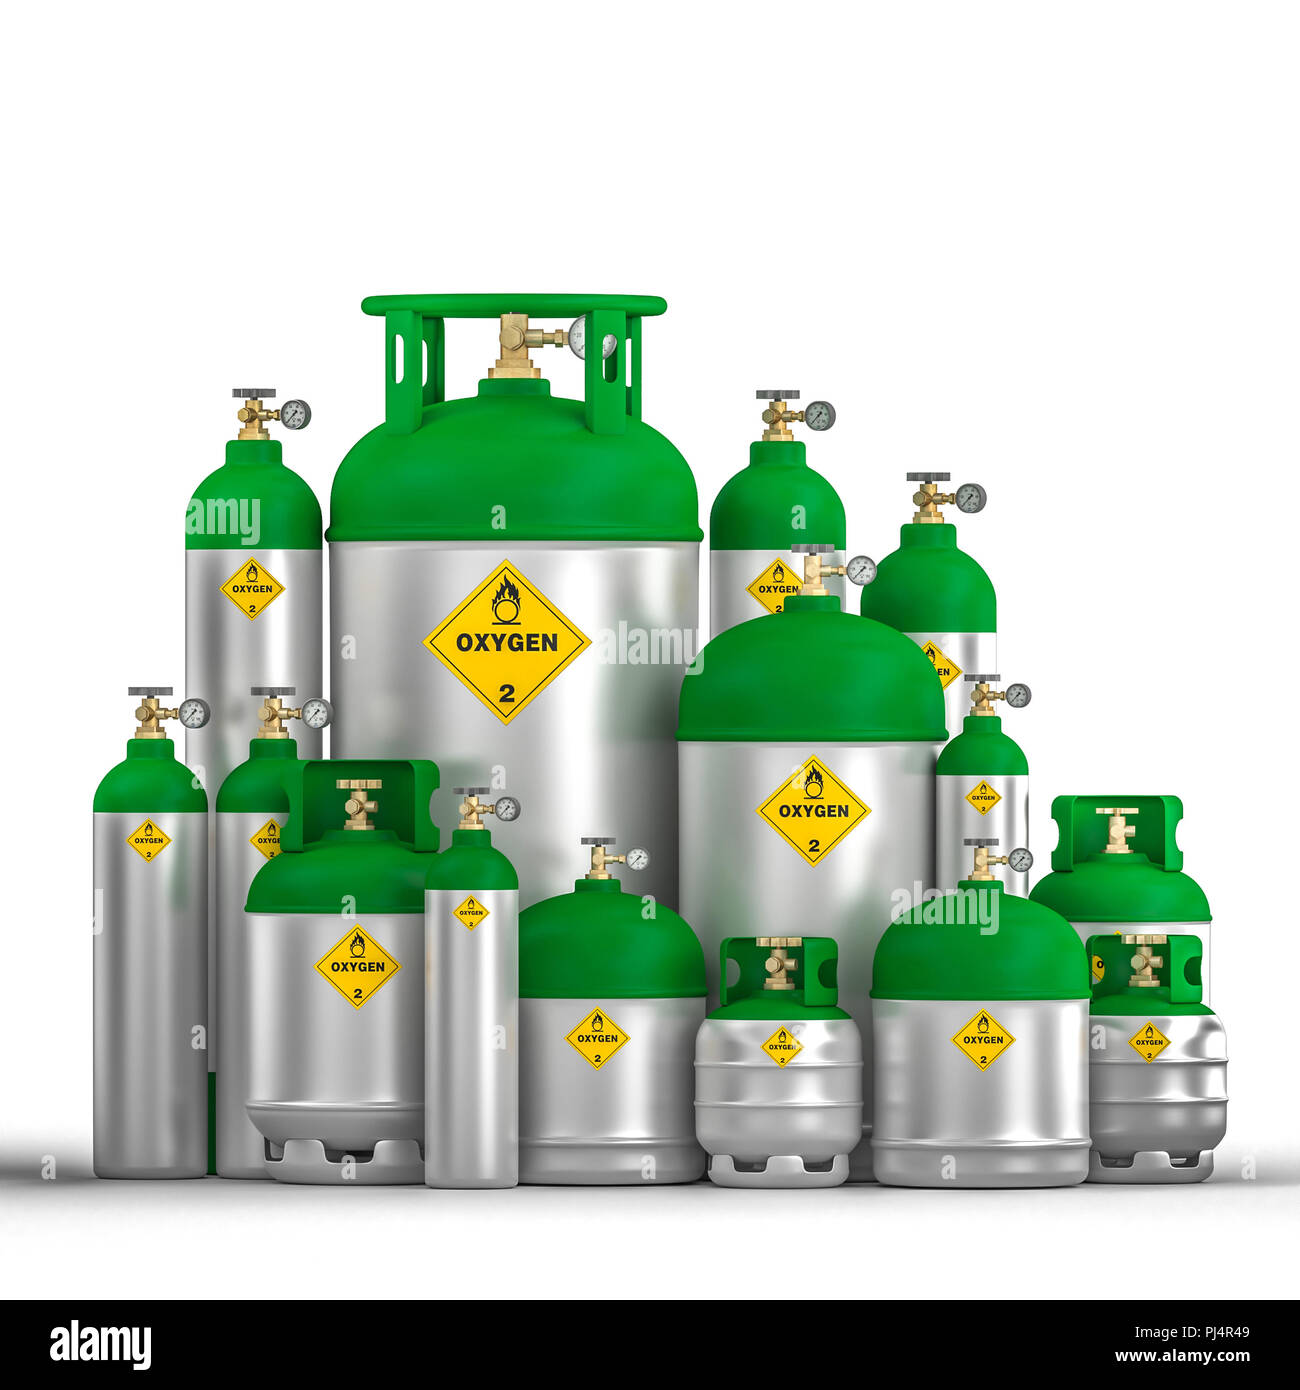 different oxygen cylinder container 3d rendering image Stock Photo